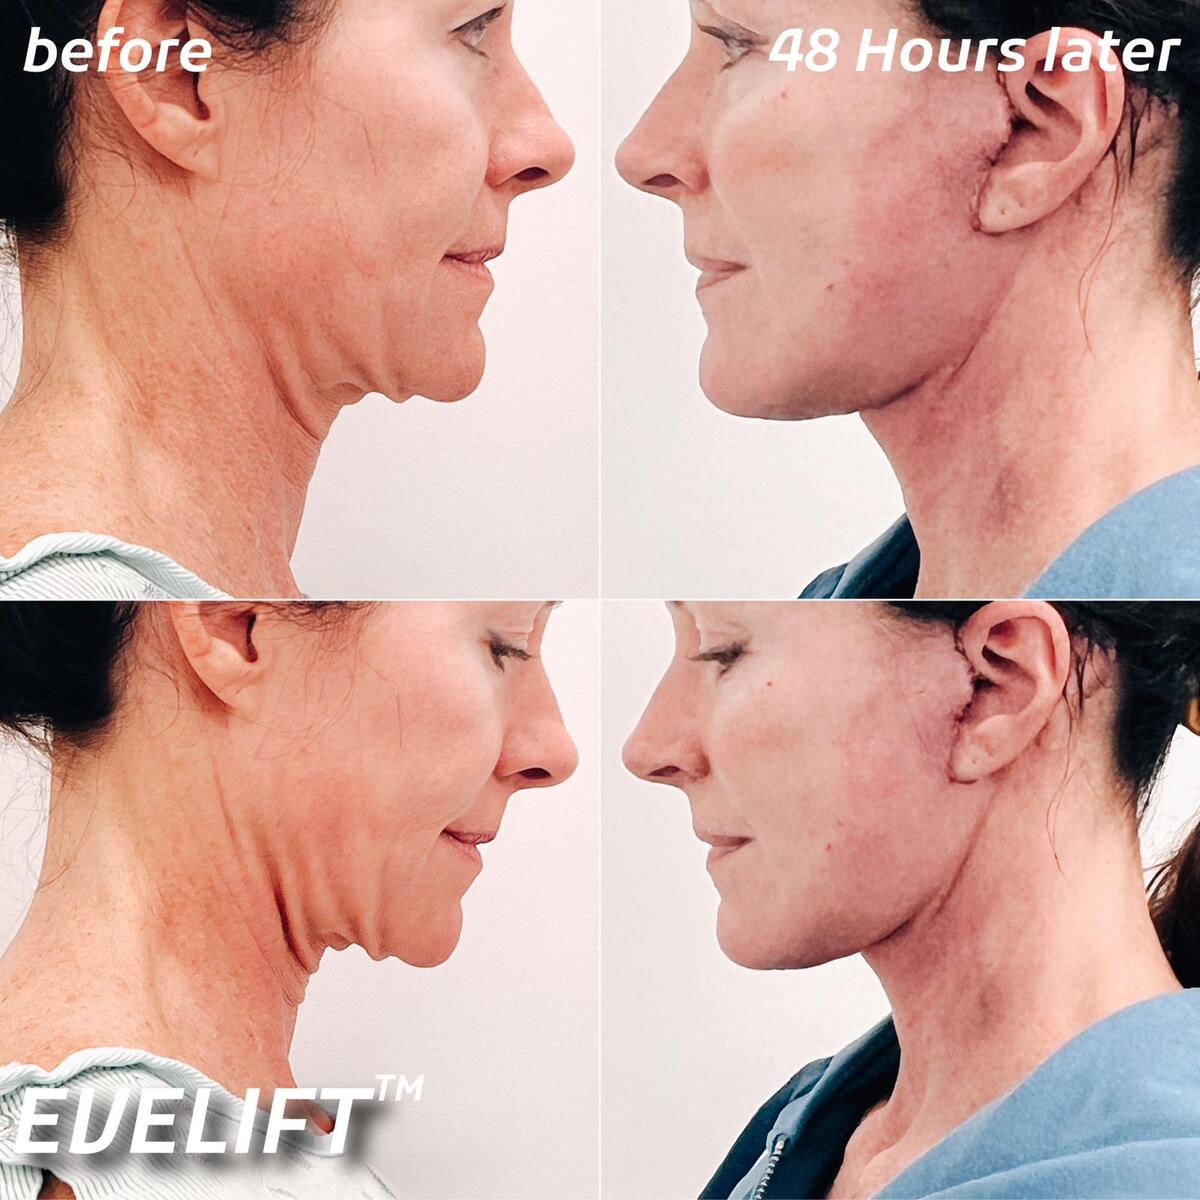 EVE Lift Before and After